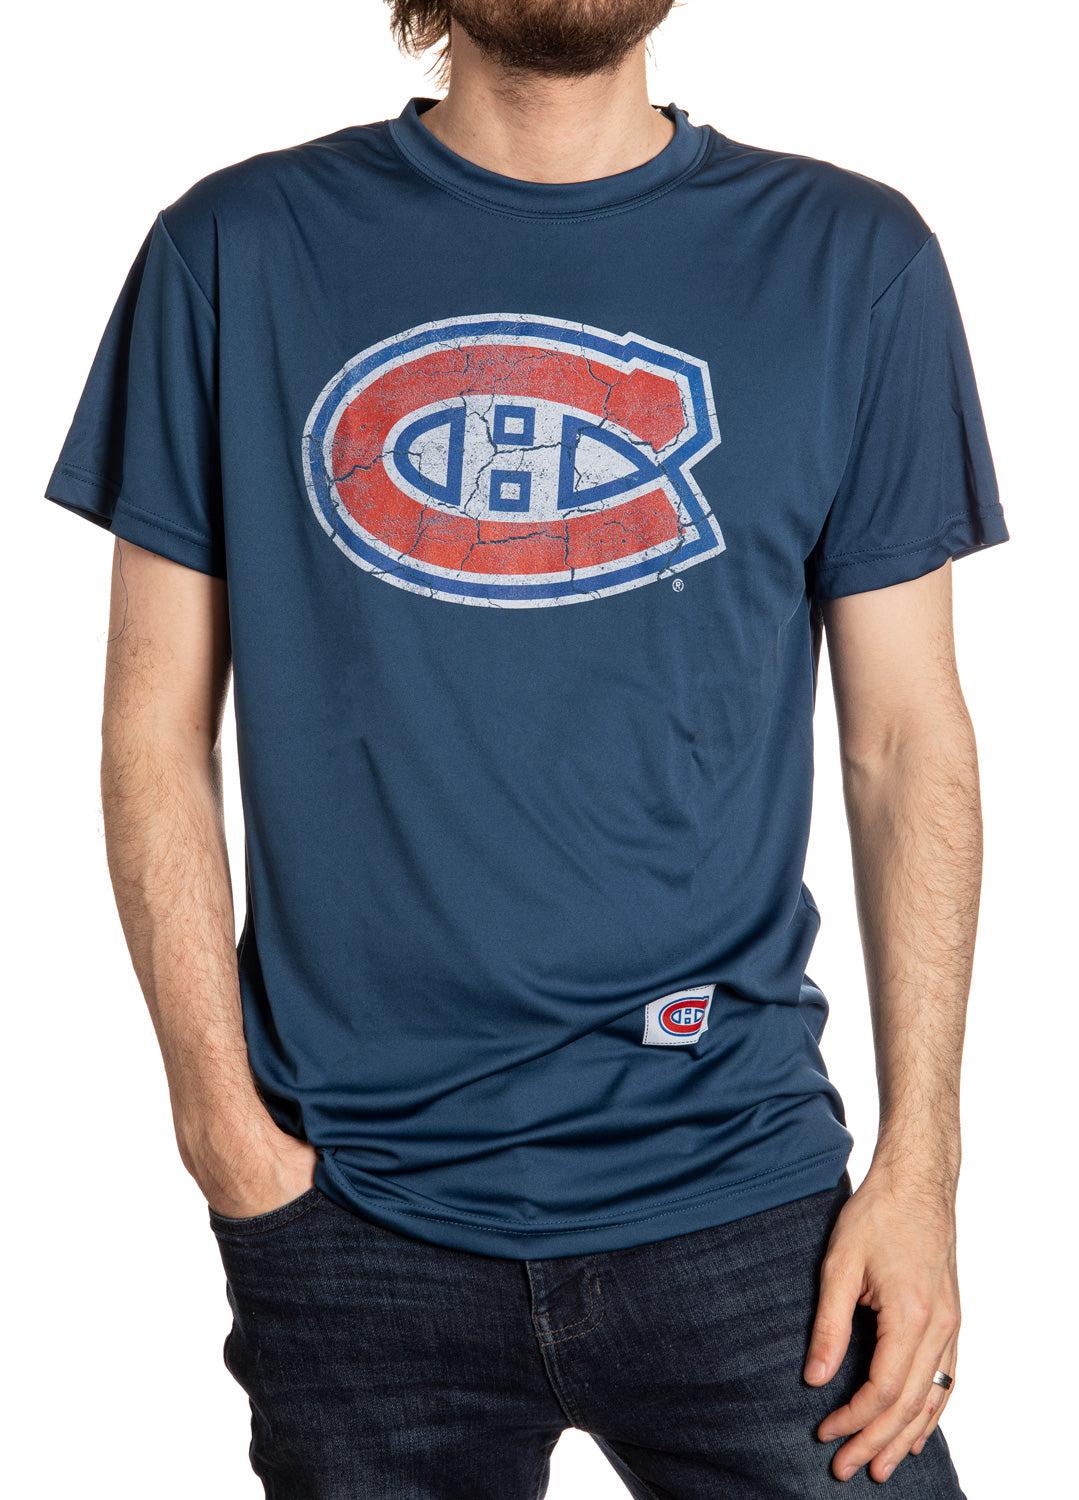 Montreal Canadiens Short Sleeve Rashguard - Distressed Logo Front View